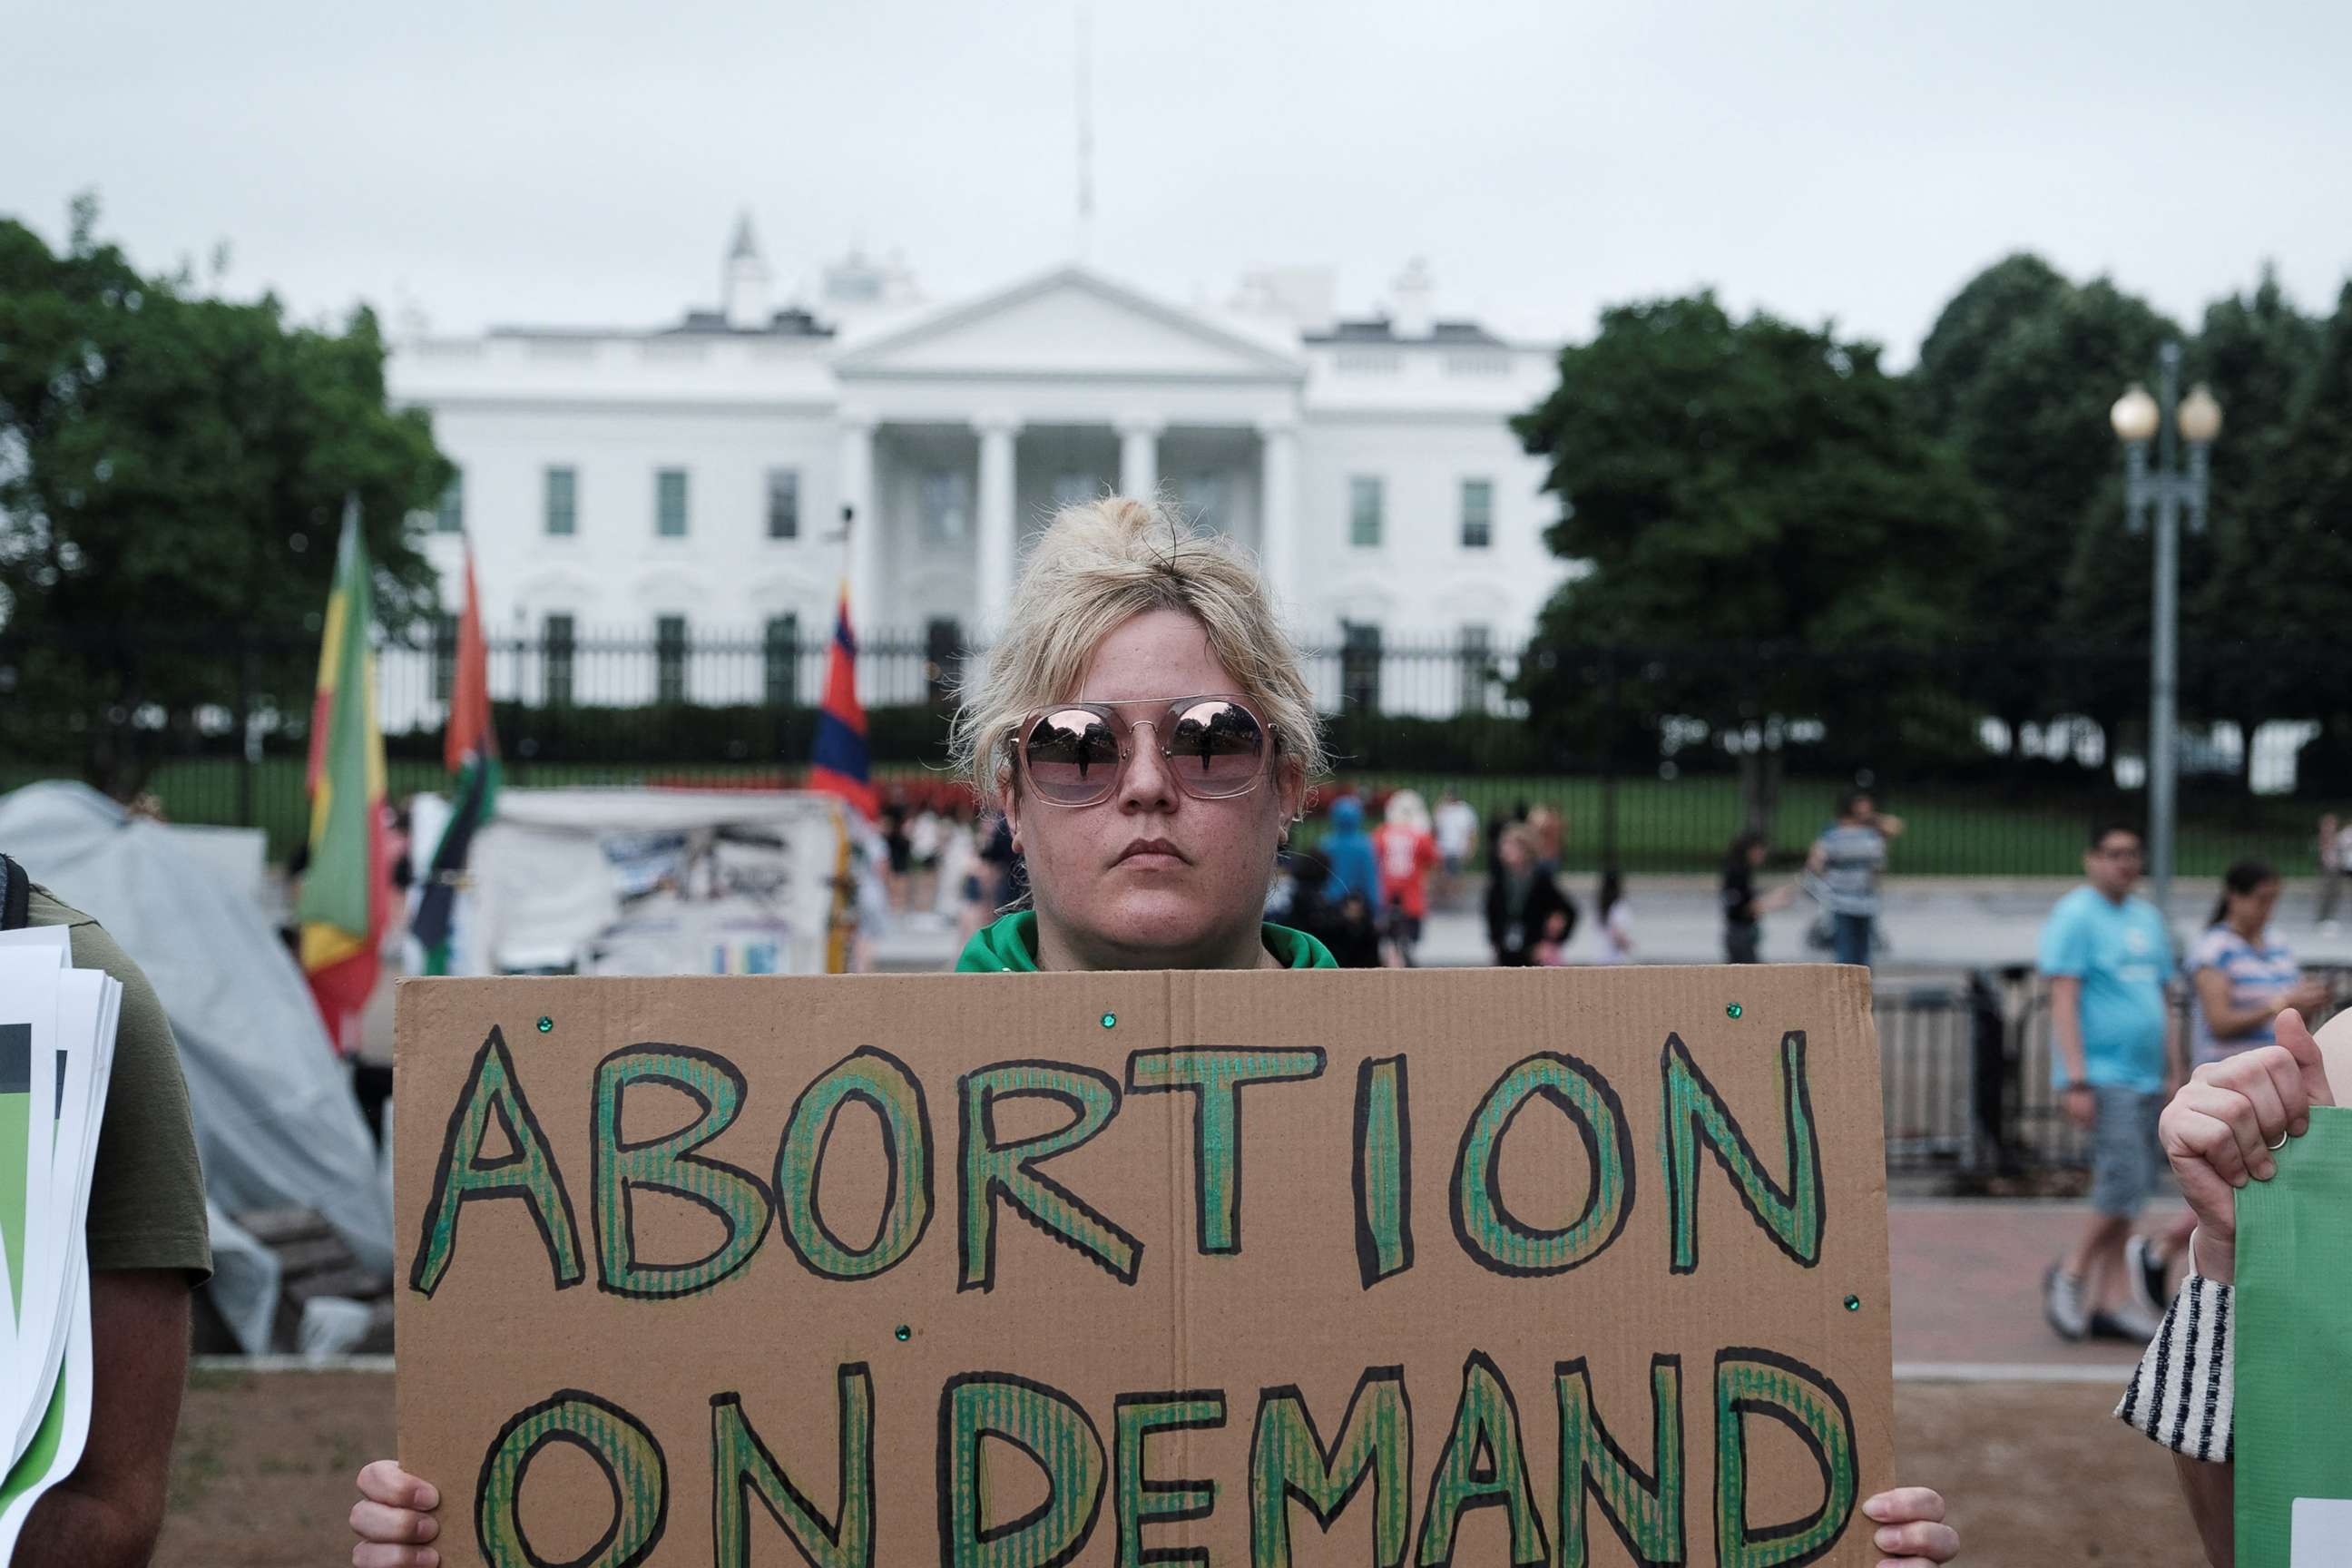 PHOTO: A Women's March activist attends a protest in the wake of the U.S. Supreme Court's decision to overturn the landmark Roe v. Wade abortion decision, in Washington, D.C., July 9, 2022. 